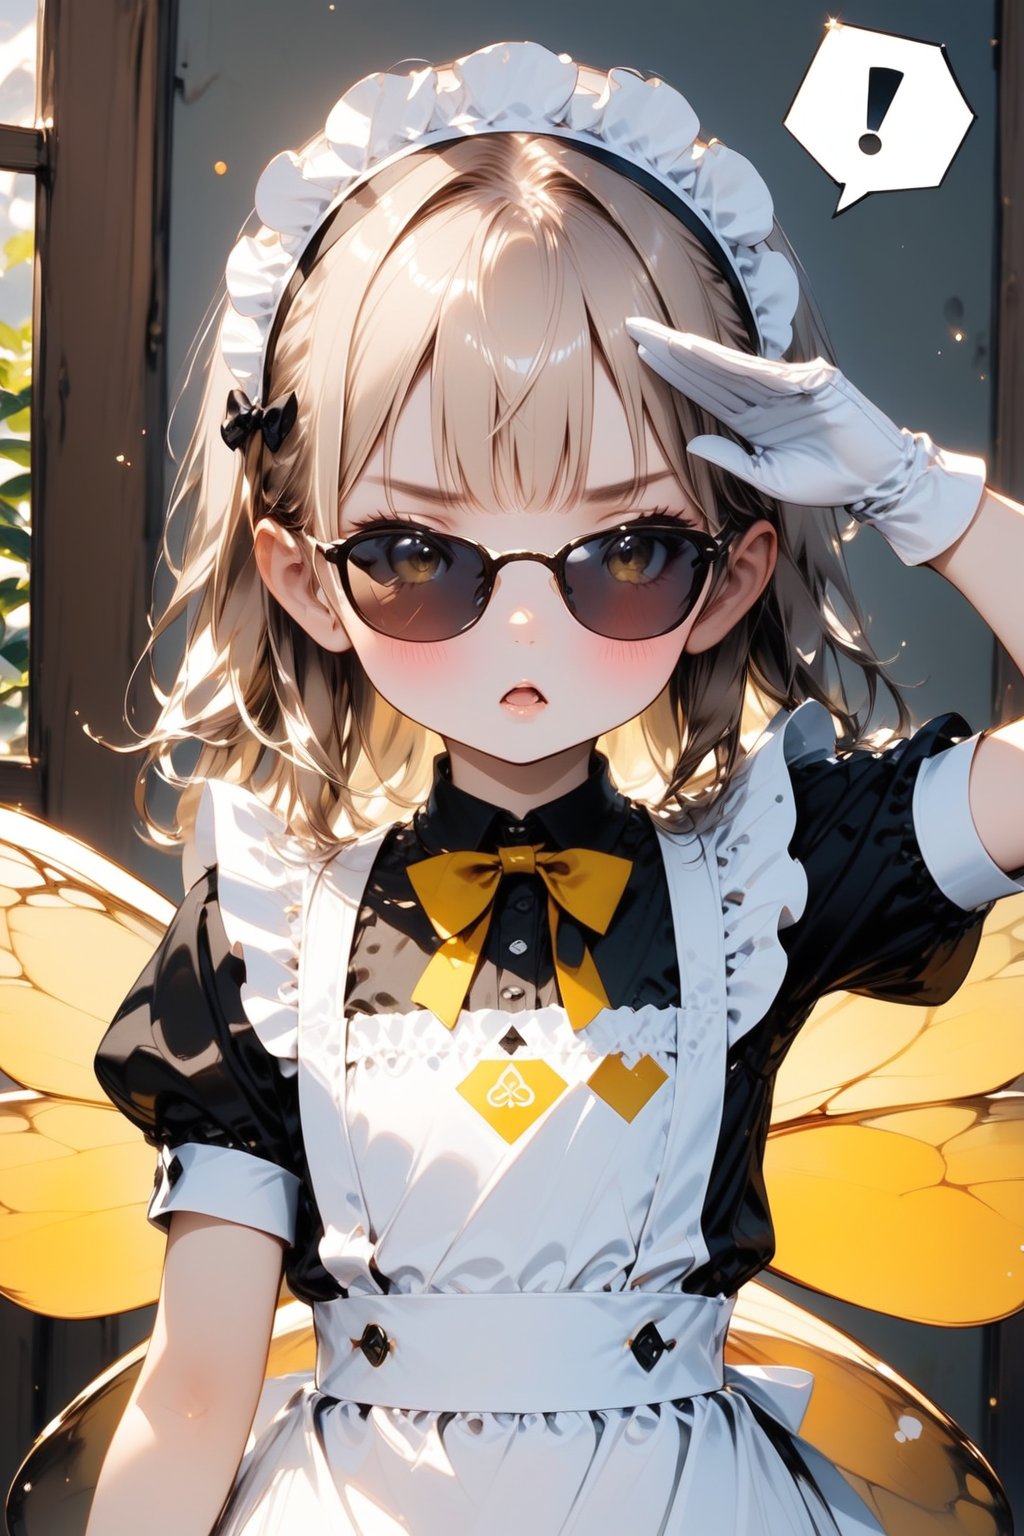 //quality, masterpiece:1.4, detailed:1.4, best quality:1.4,//,1girl,solo,loli,//,(yellow hair),(long hair),blunt bangs,//,(bee_wings), (sunglasses),(spades_symbols),bow,maid headband,white maid_costume,white gloves,//,blush,mouth_open, serious,//,speech_balloon,spoken_exclamation_mark,!,!!,hand up,(saluting),//,indoors,bees,room,cowboy_shot,Deformed,agtsg, close_up portrait,straight-on,sunglasses,Details,Detailed Masterpiece,